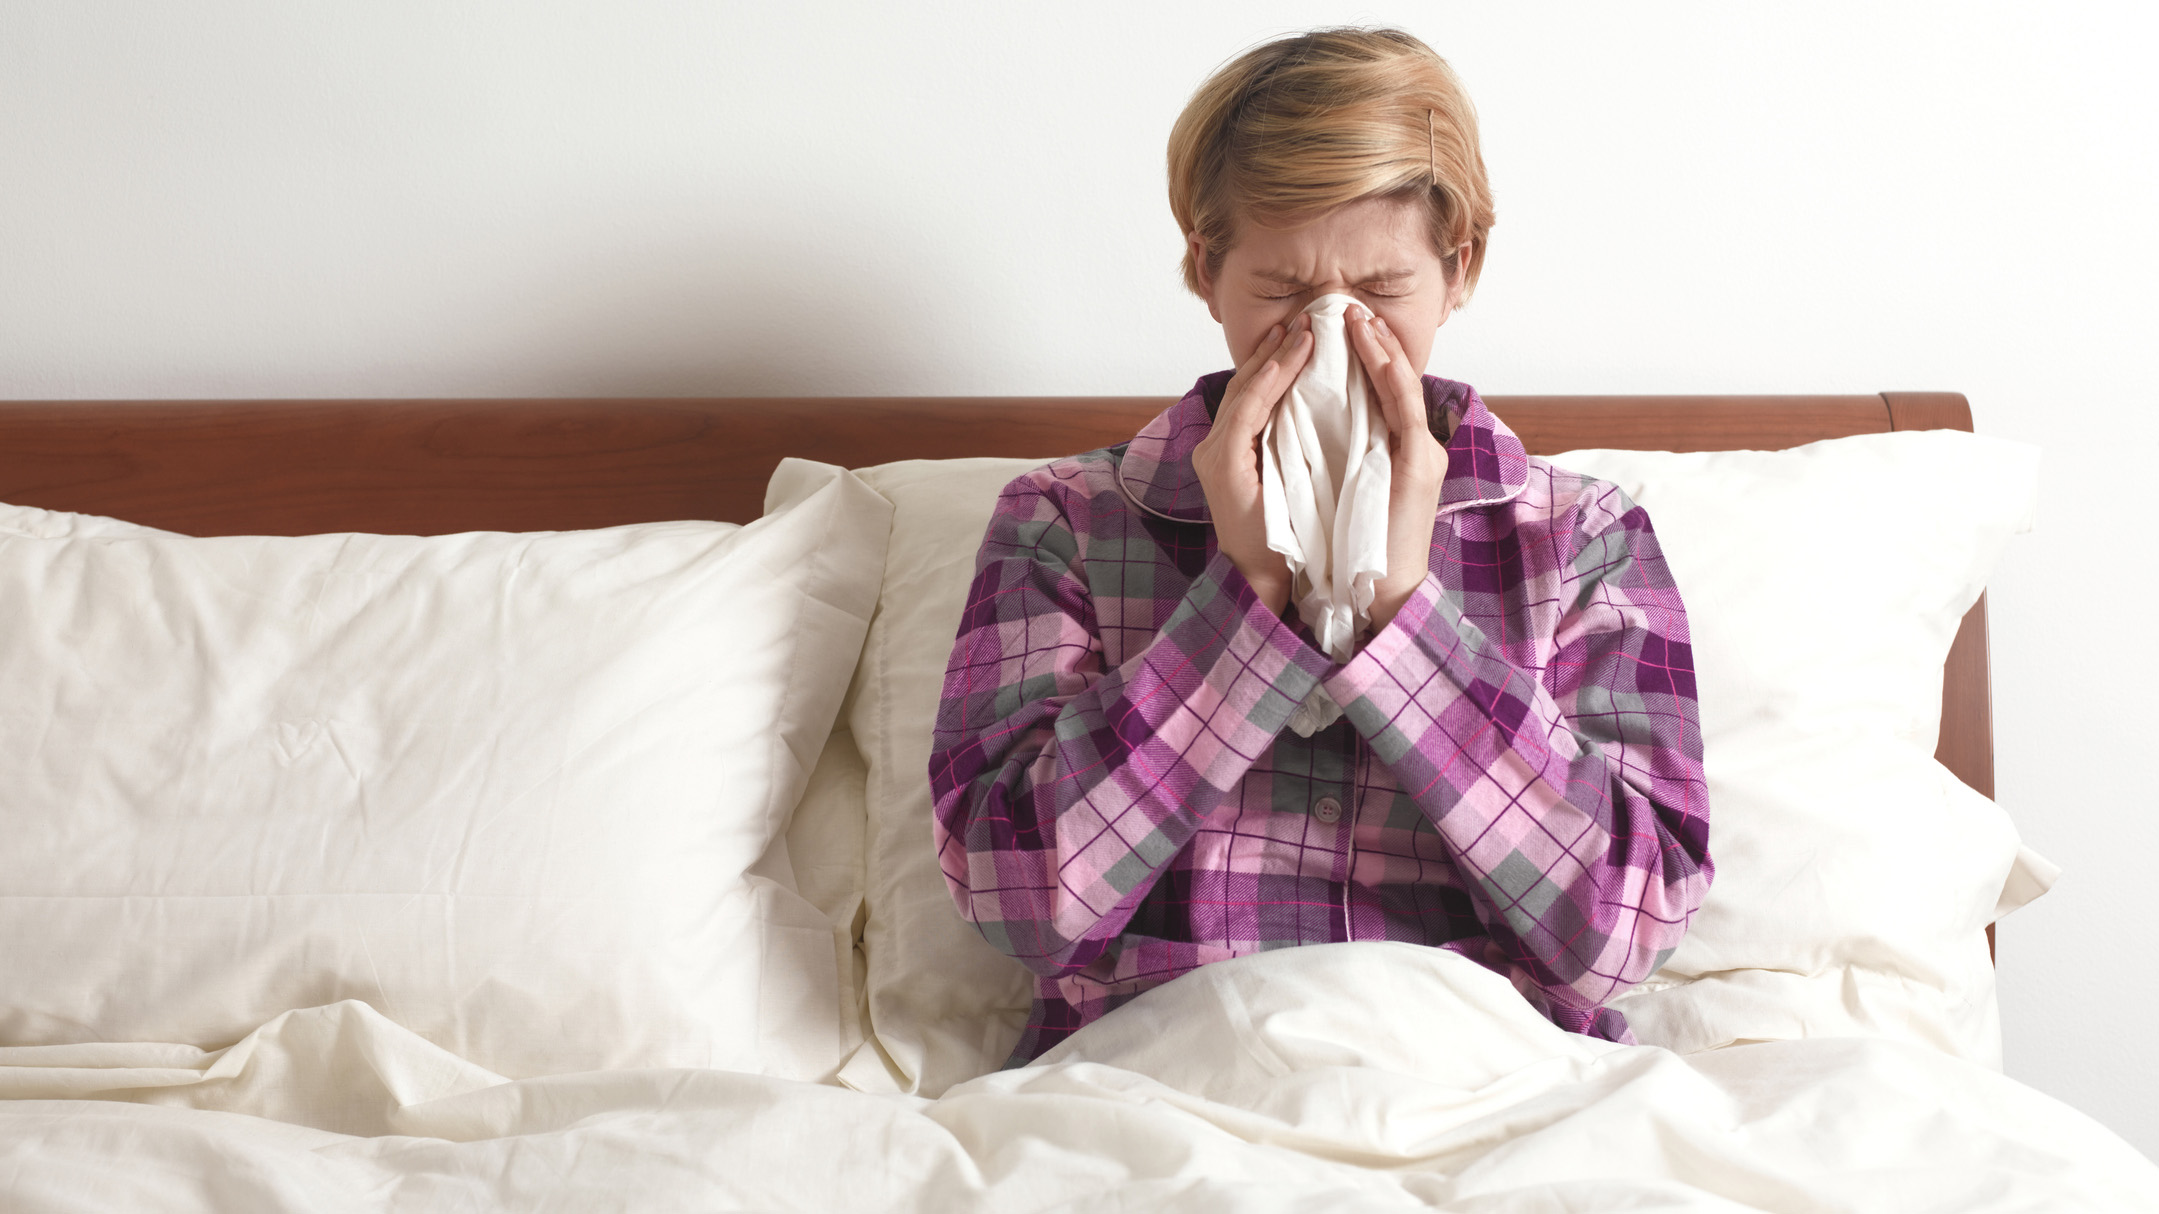 A woman with short blonde hair blows her nose in bed because she has allergies which aggravate her snoring at night